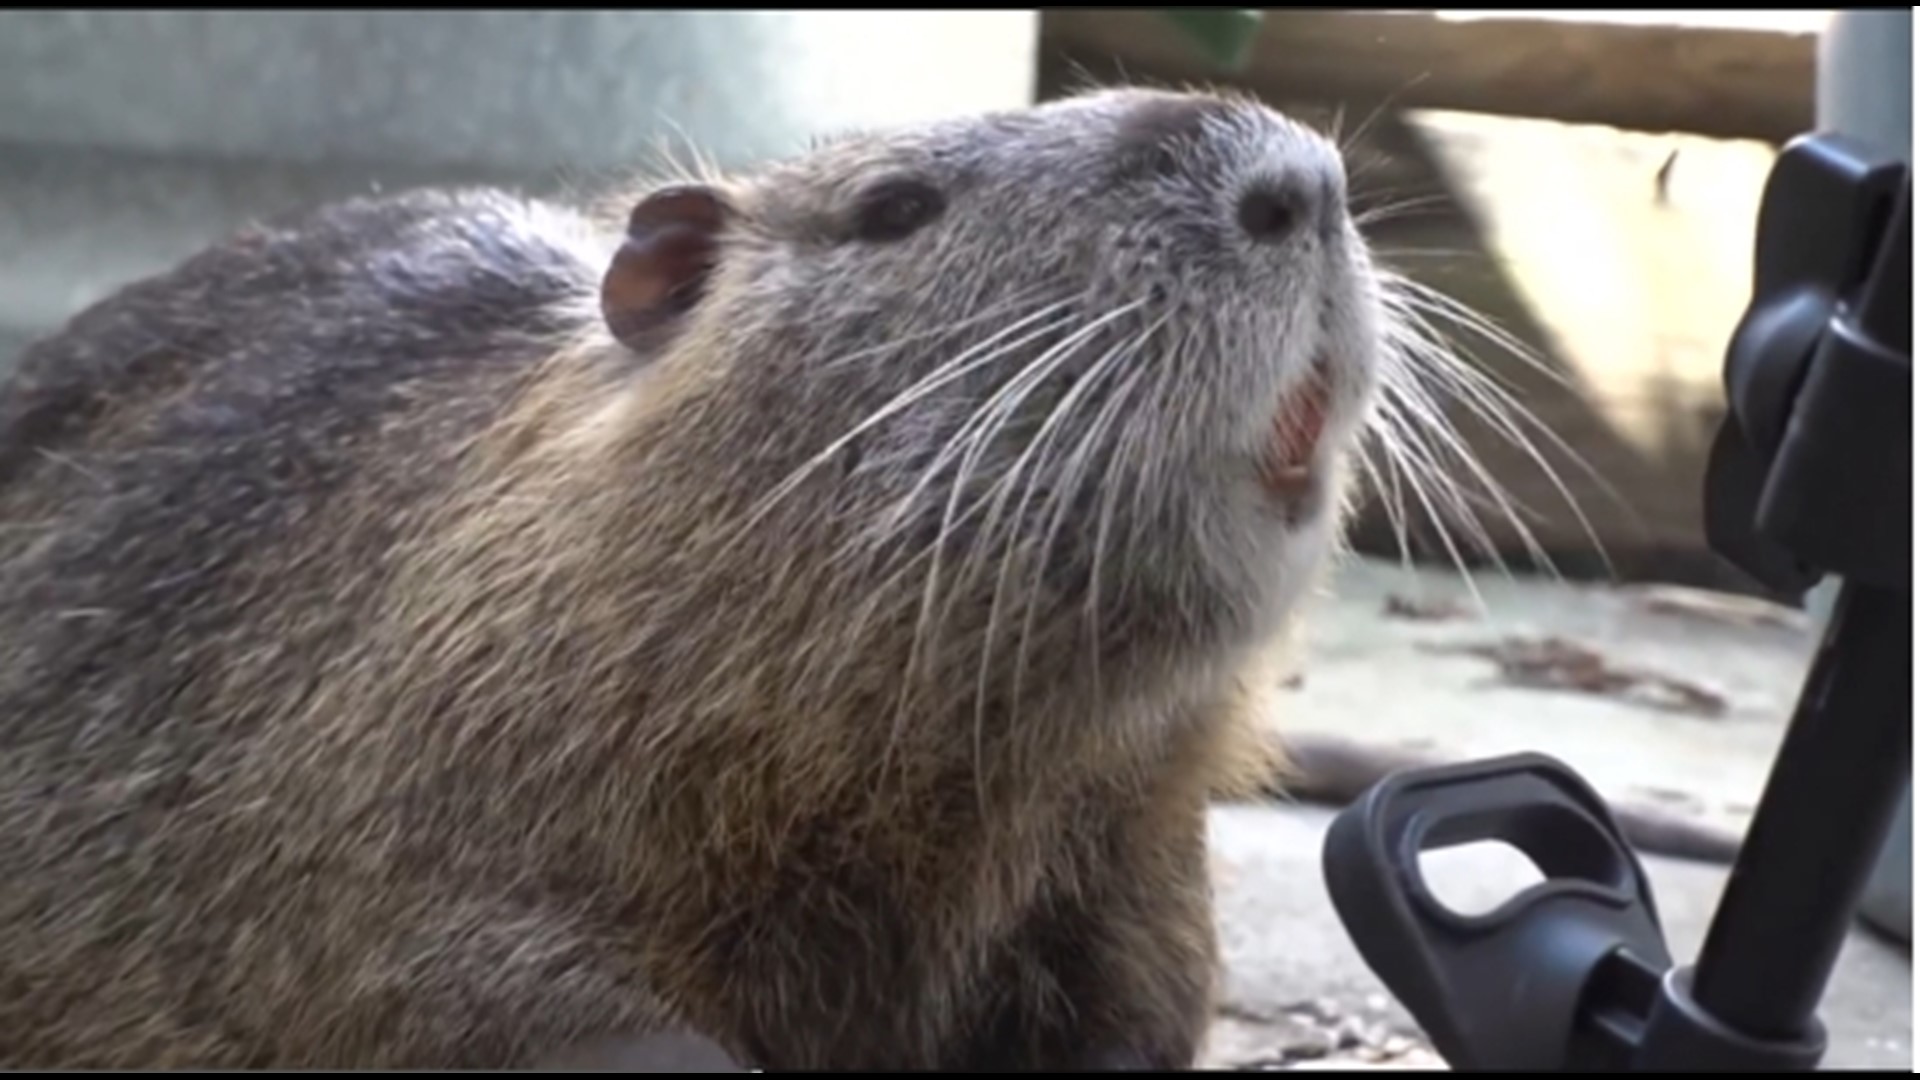 The 2-year-old Nutria, named Neuty, has become a local celebrity in his Jefferson Parish community.